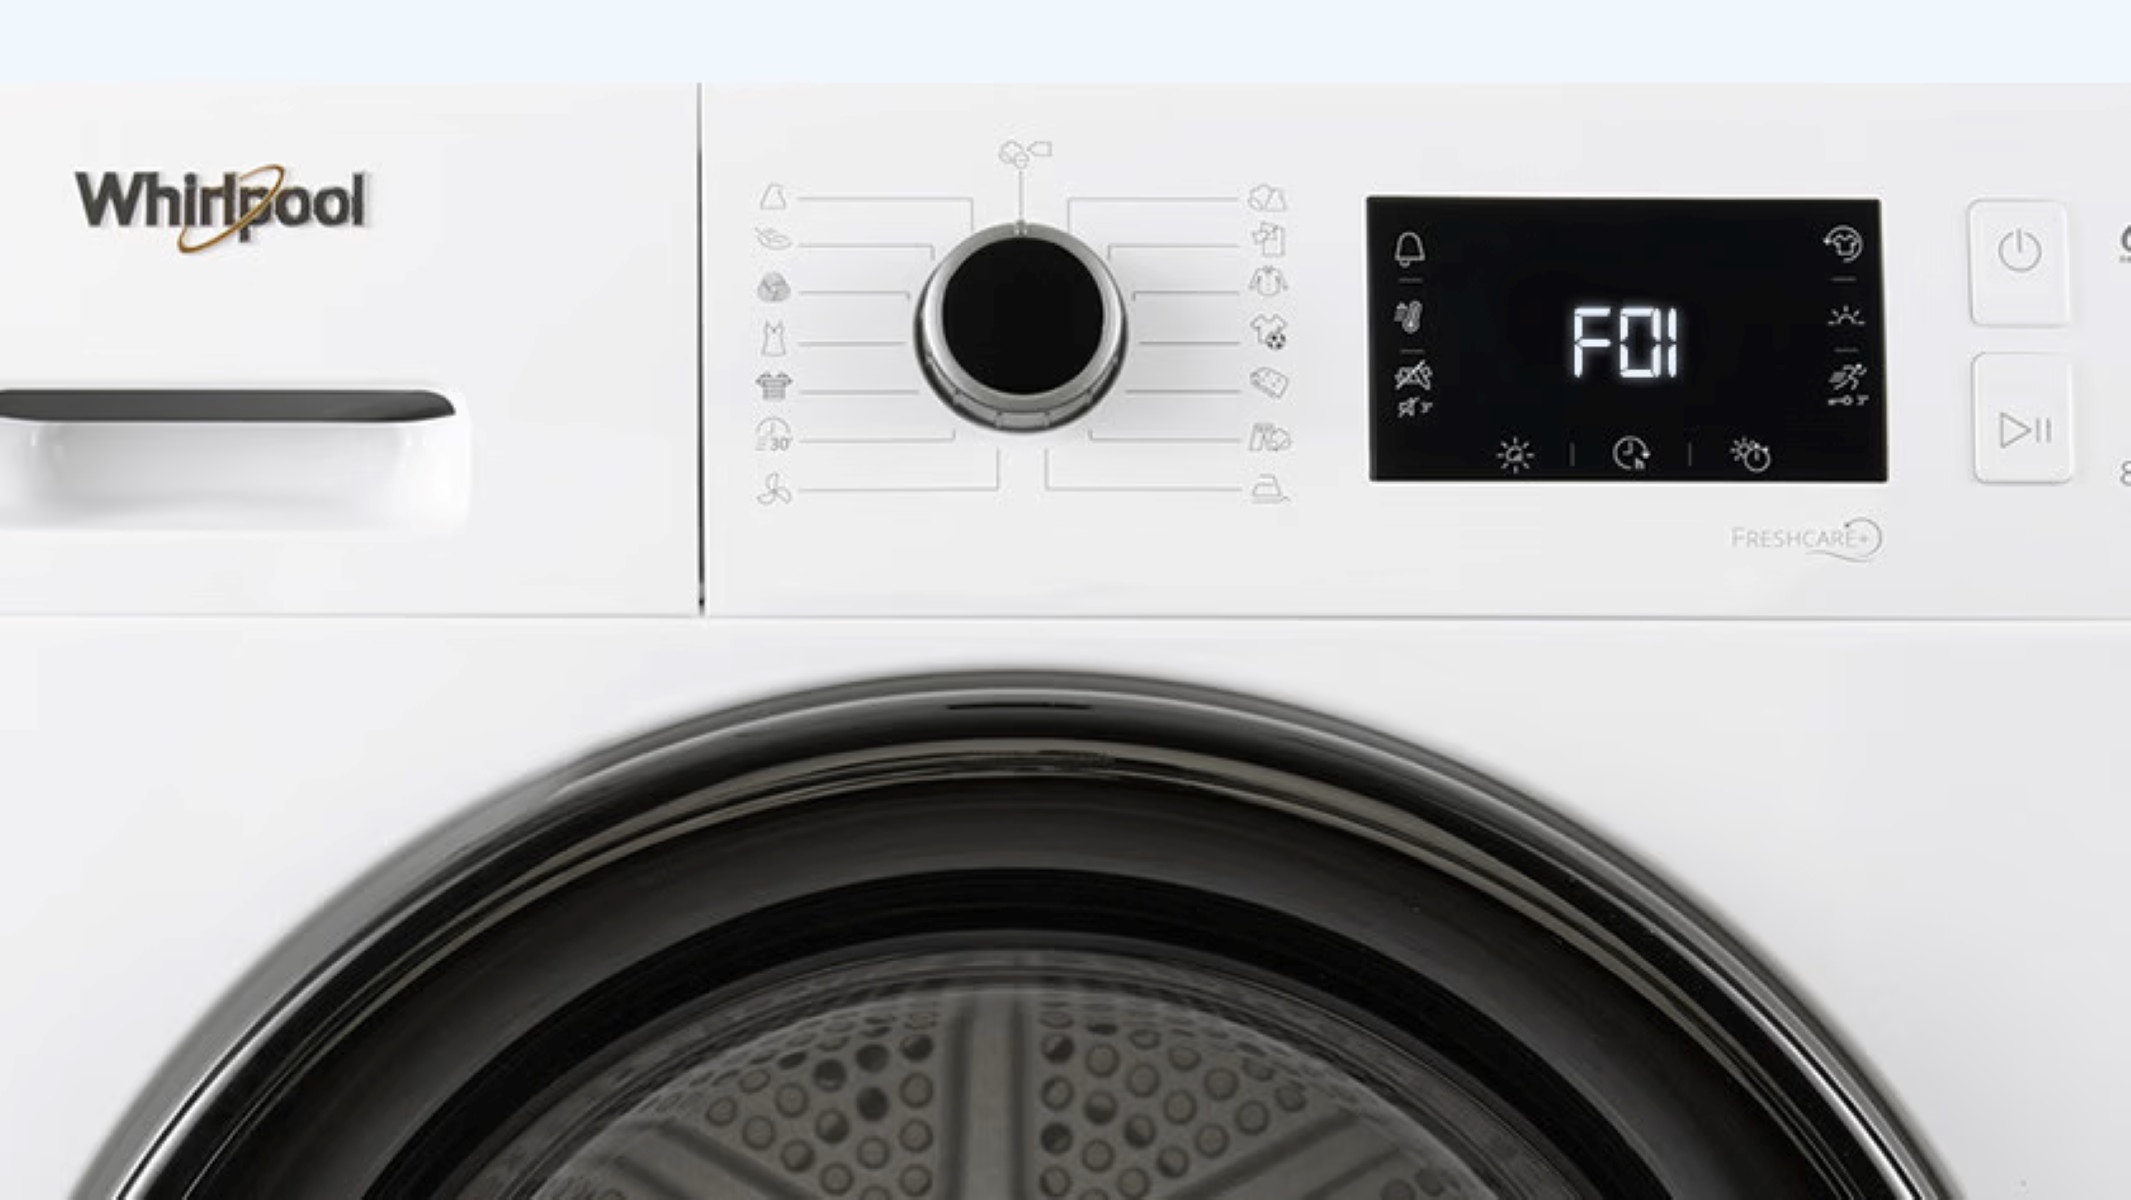 How To Fix The Error Code F01 For Whirlpool Dryer